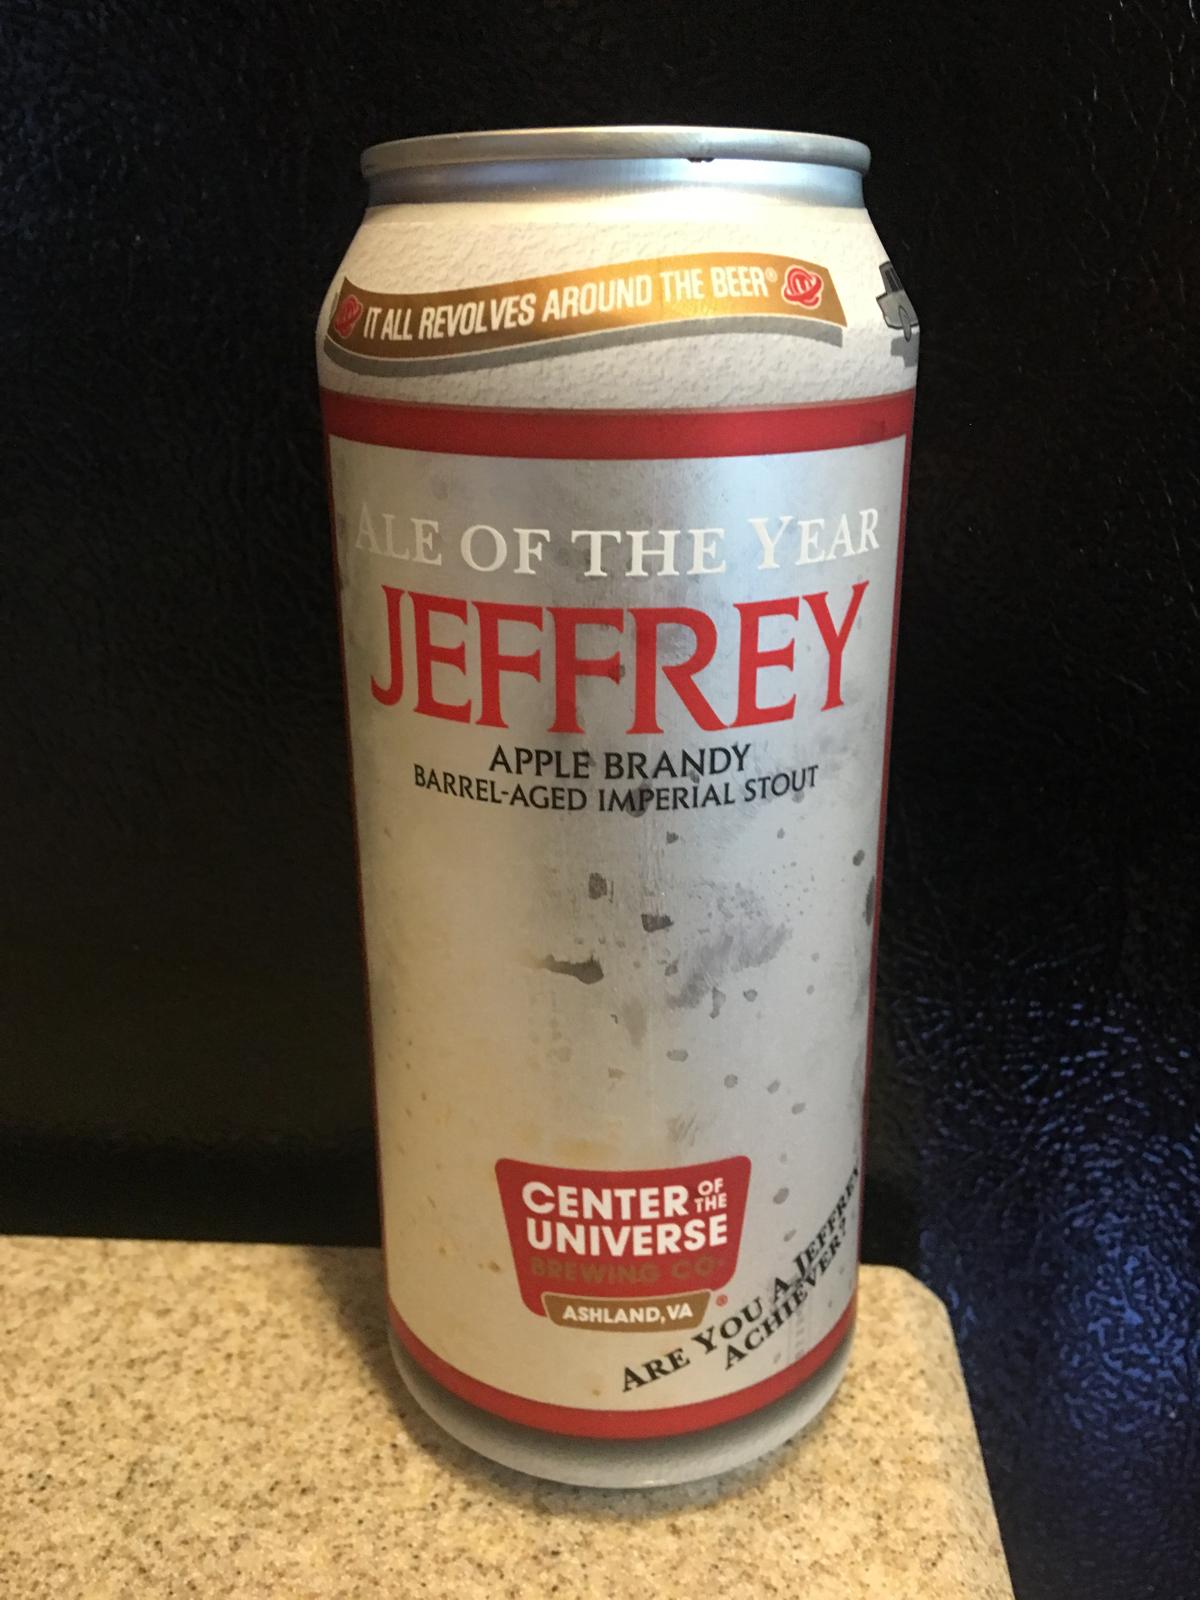 Jeffrey Ale Of The Year